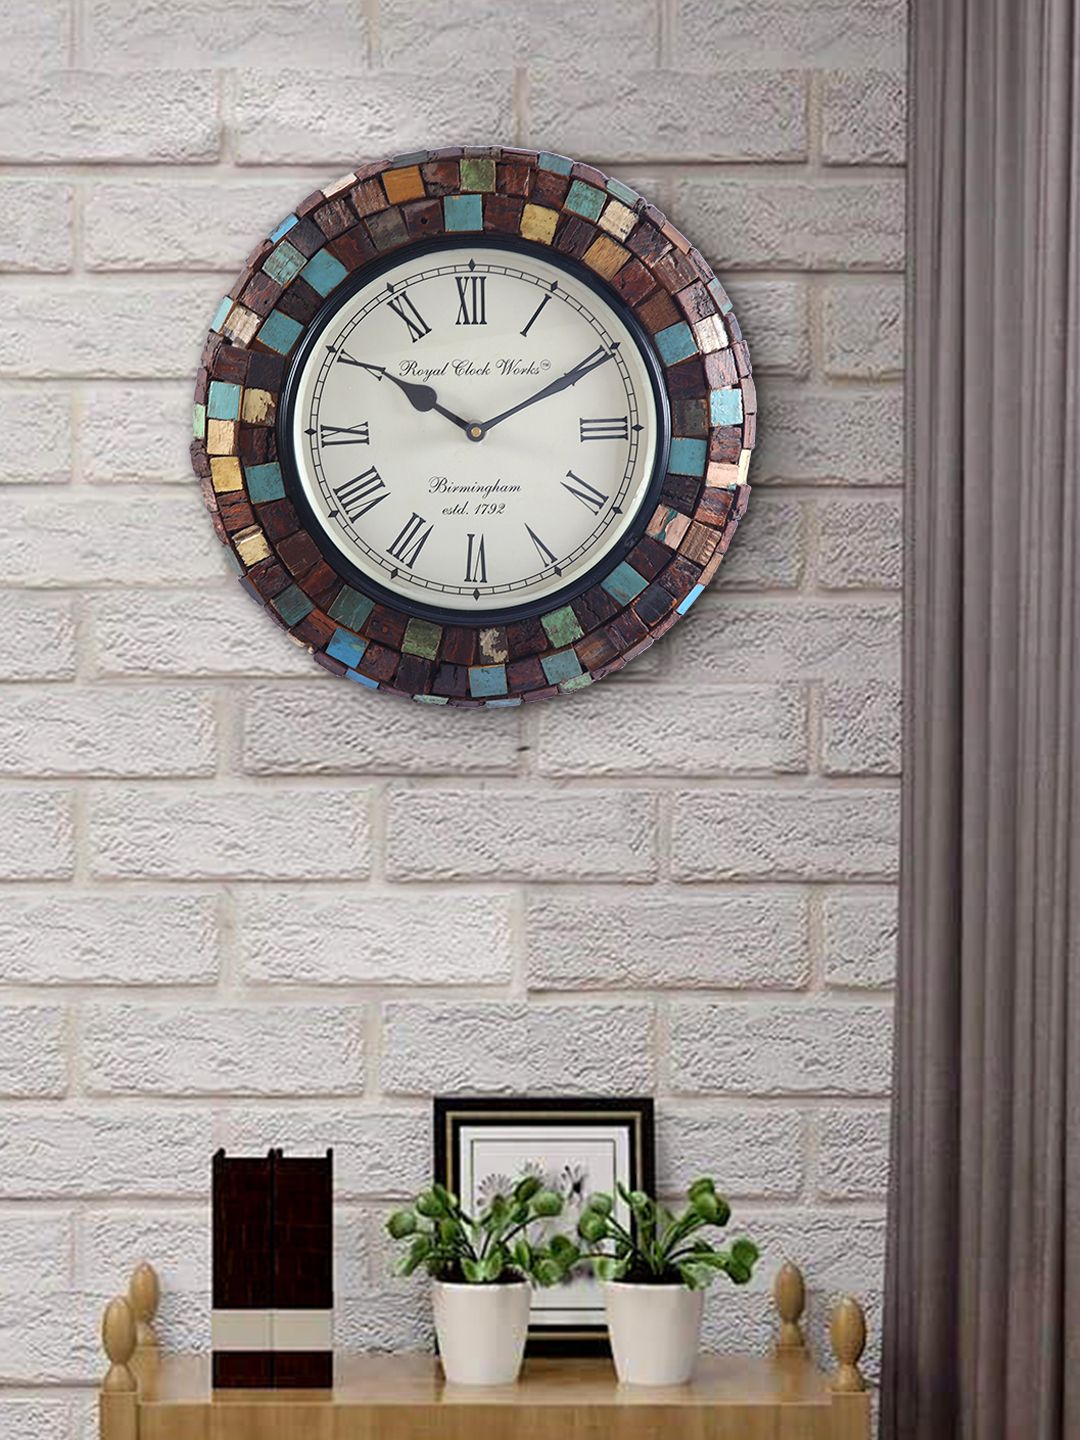 Aapno Rajasthan Brown & Green Printed Contemporary Wall Clock Price in India